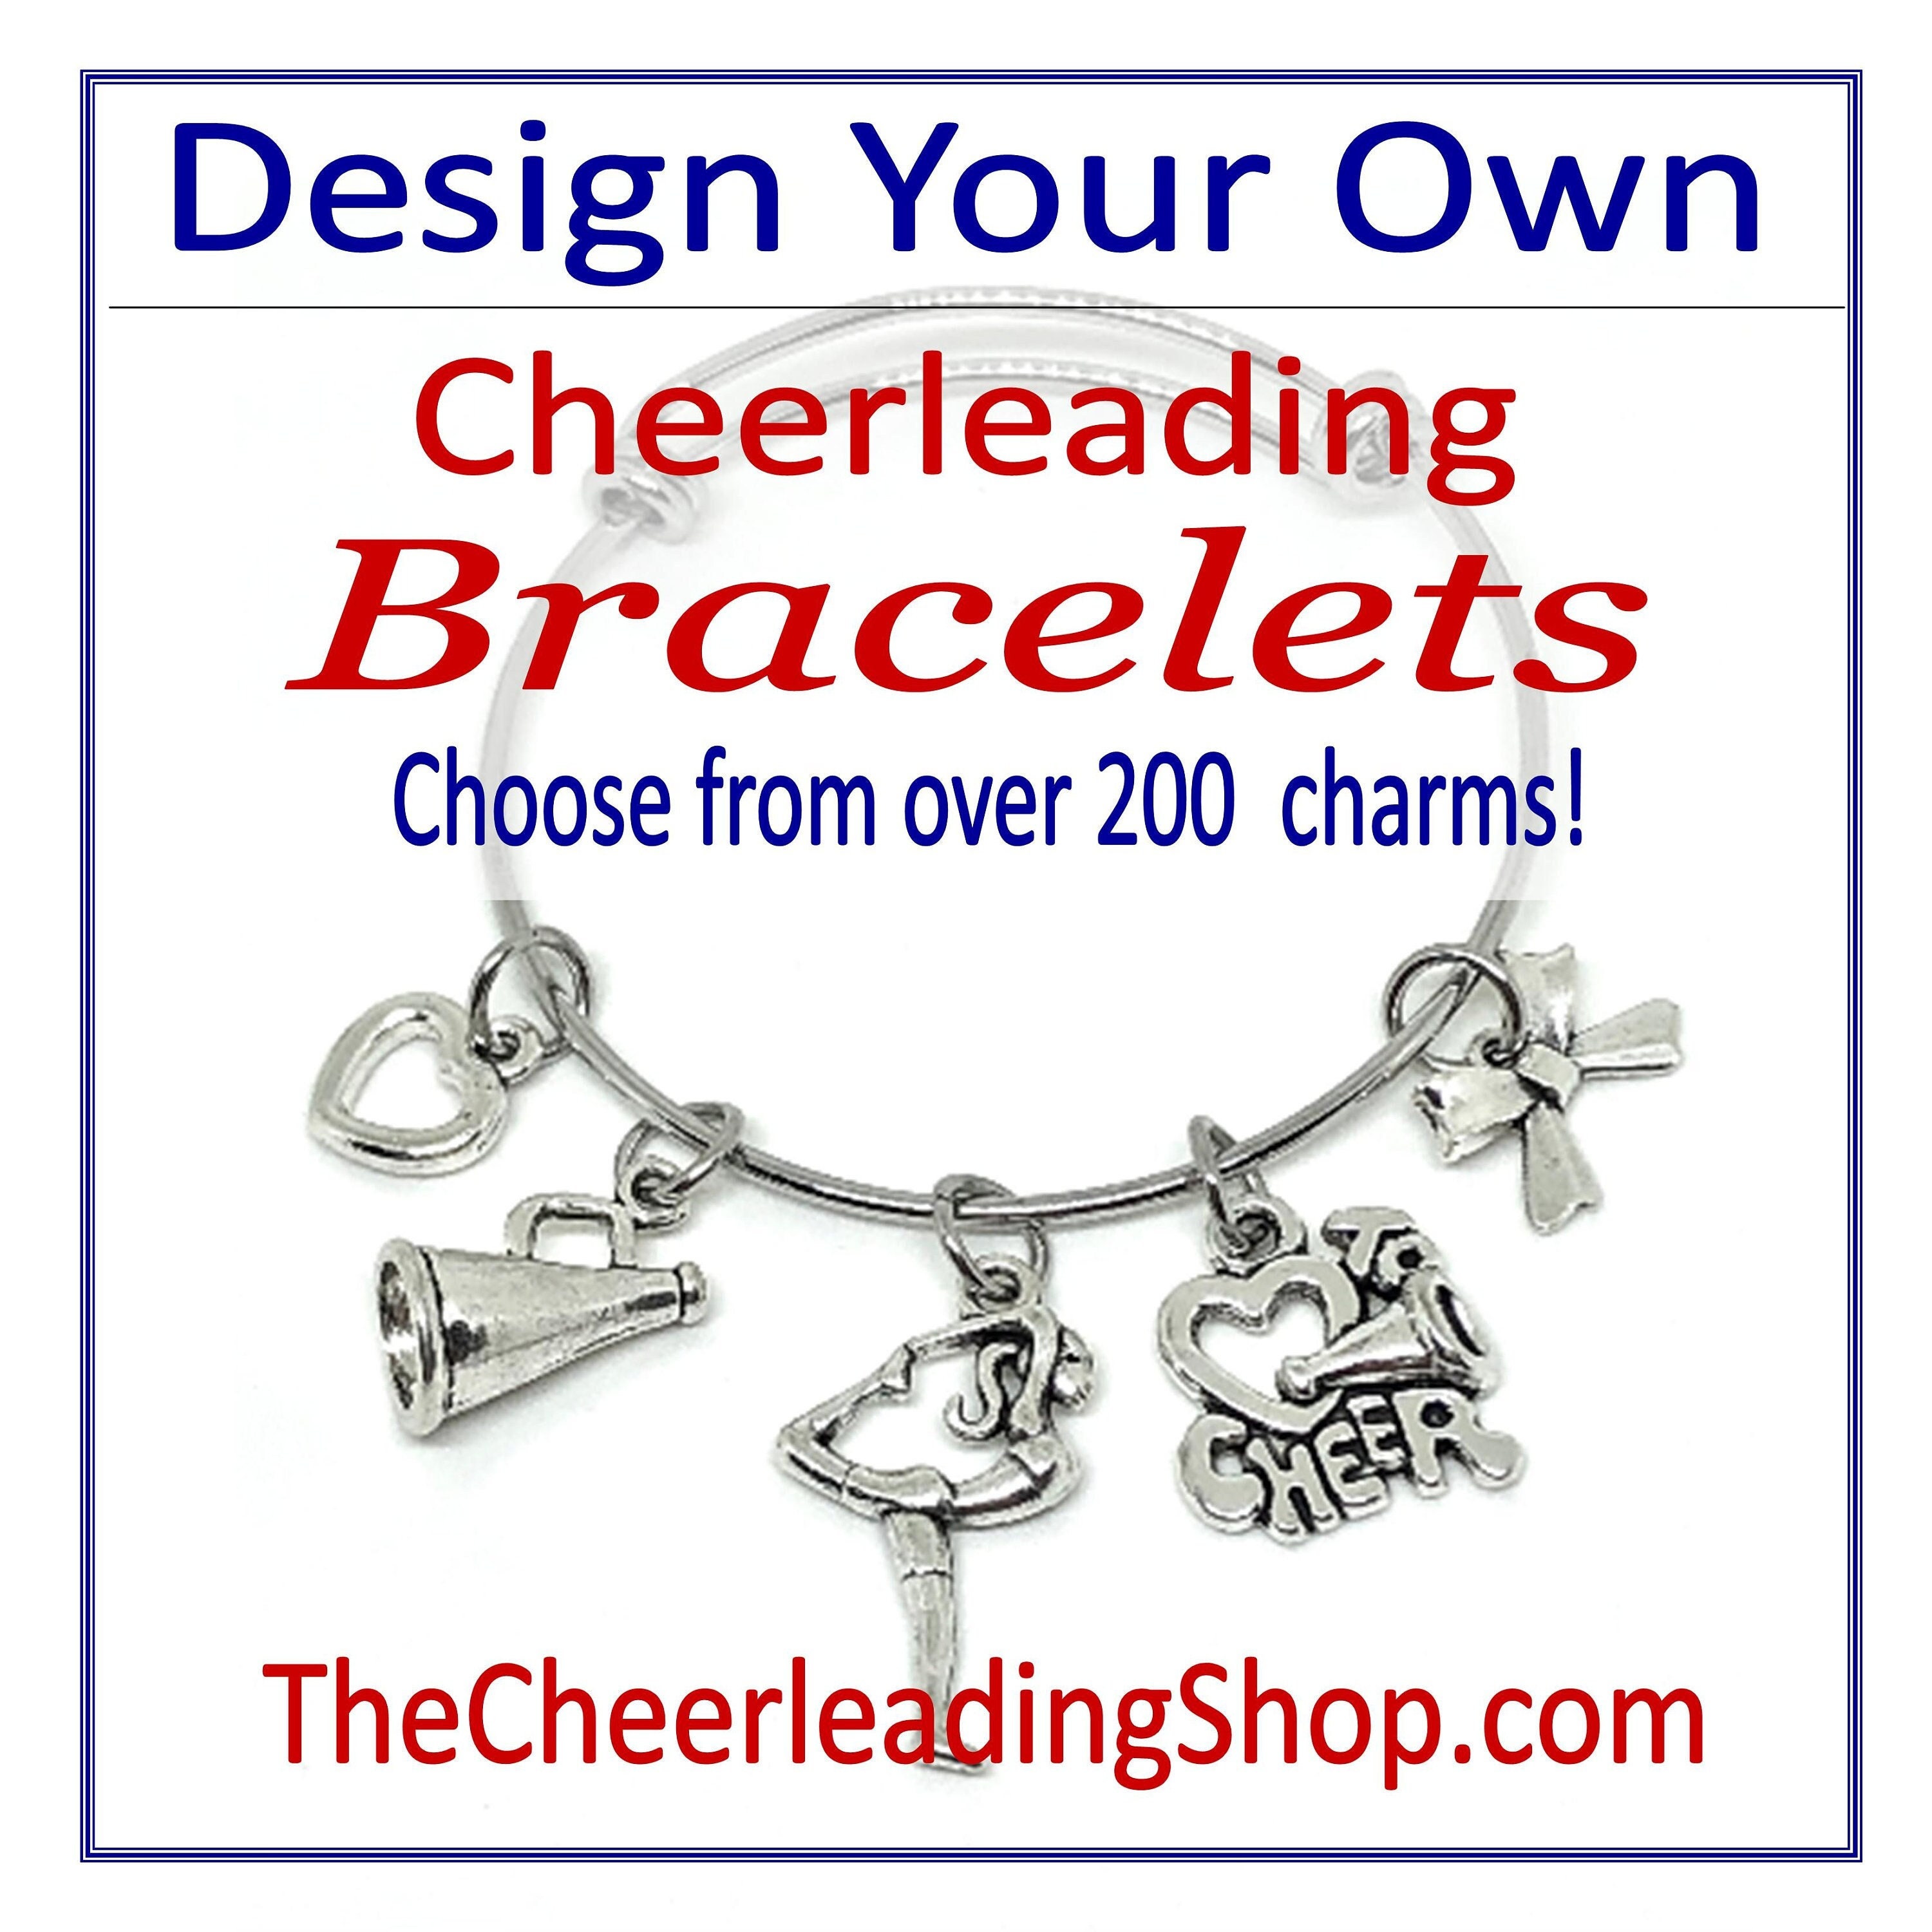 Personalize Your Own Cheerleading Charm Key Chain, Cheerleading Accessories 4 Charms